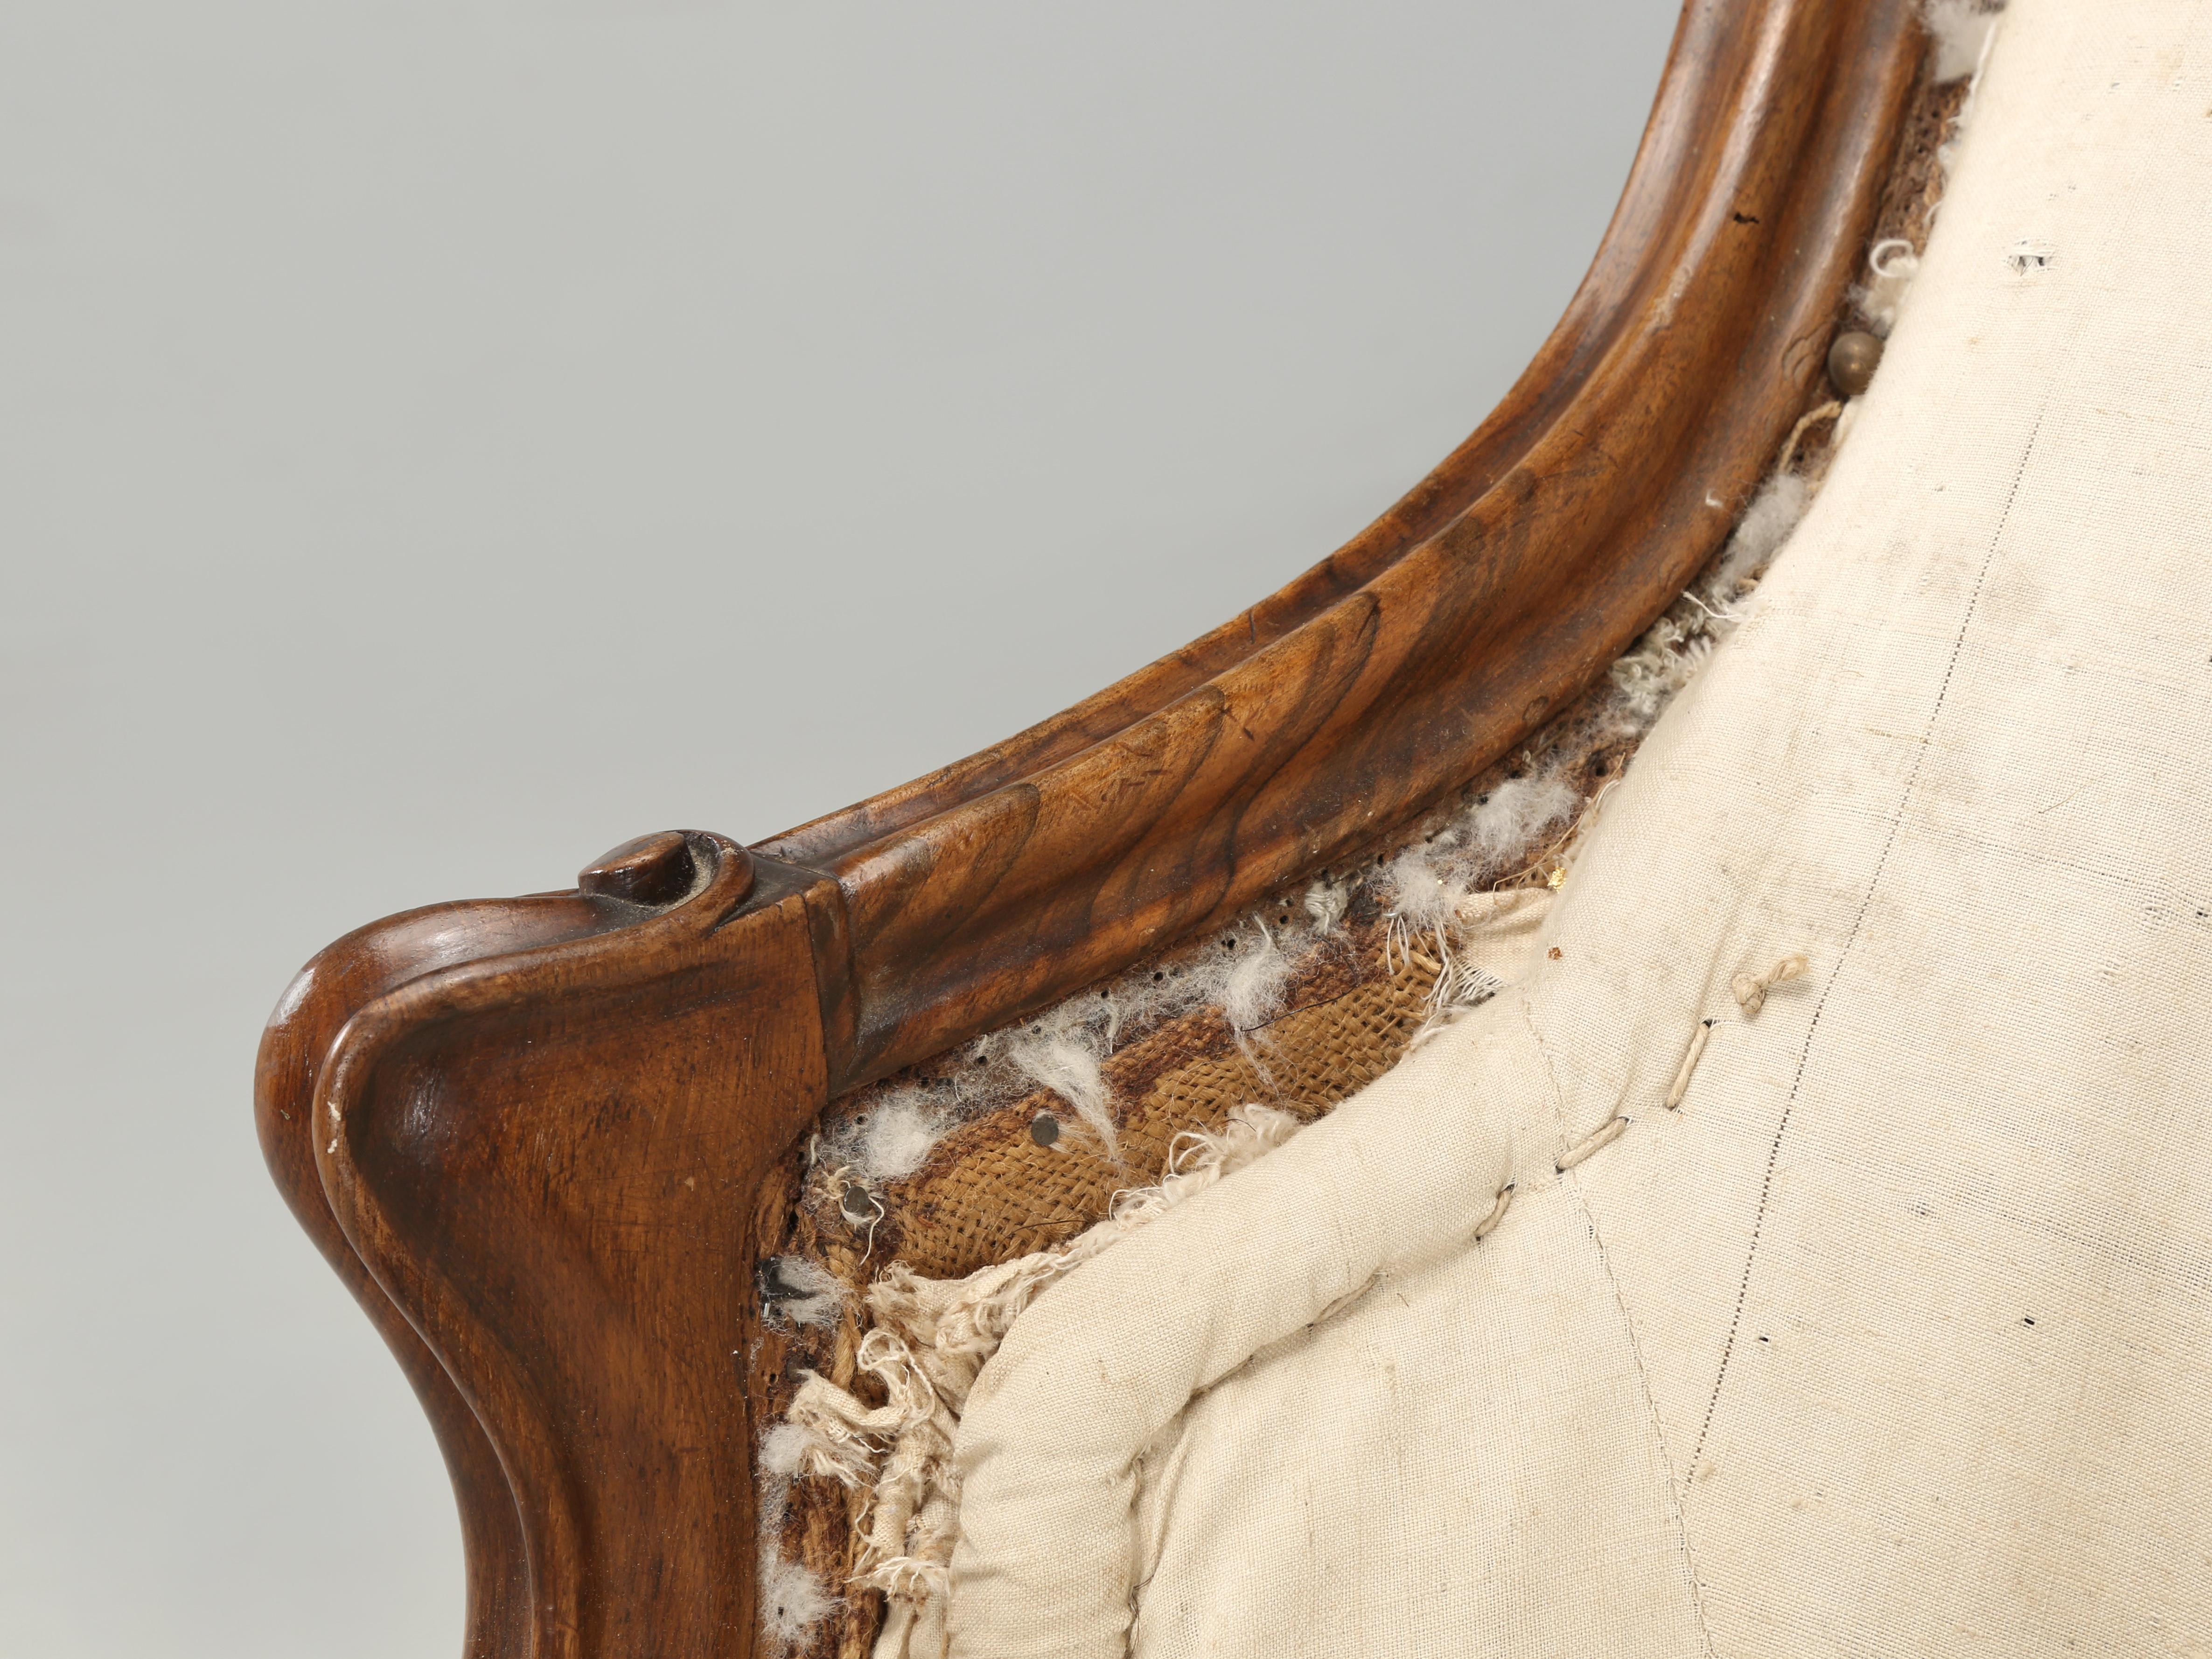 Carved Antique French Chaise Lounge in Figured Walnut in the Méridienne Style, c1860's